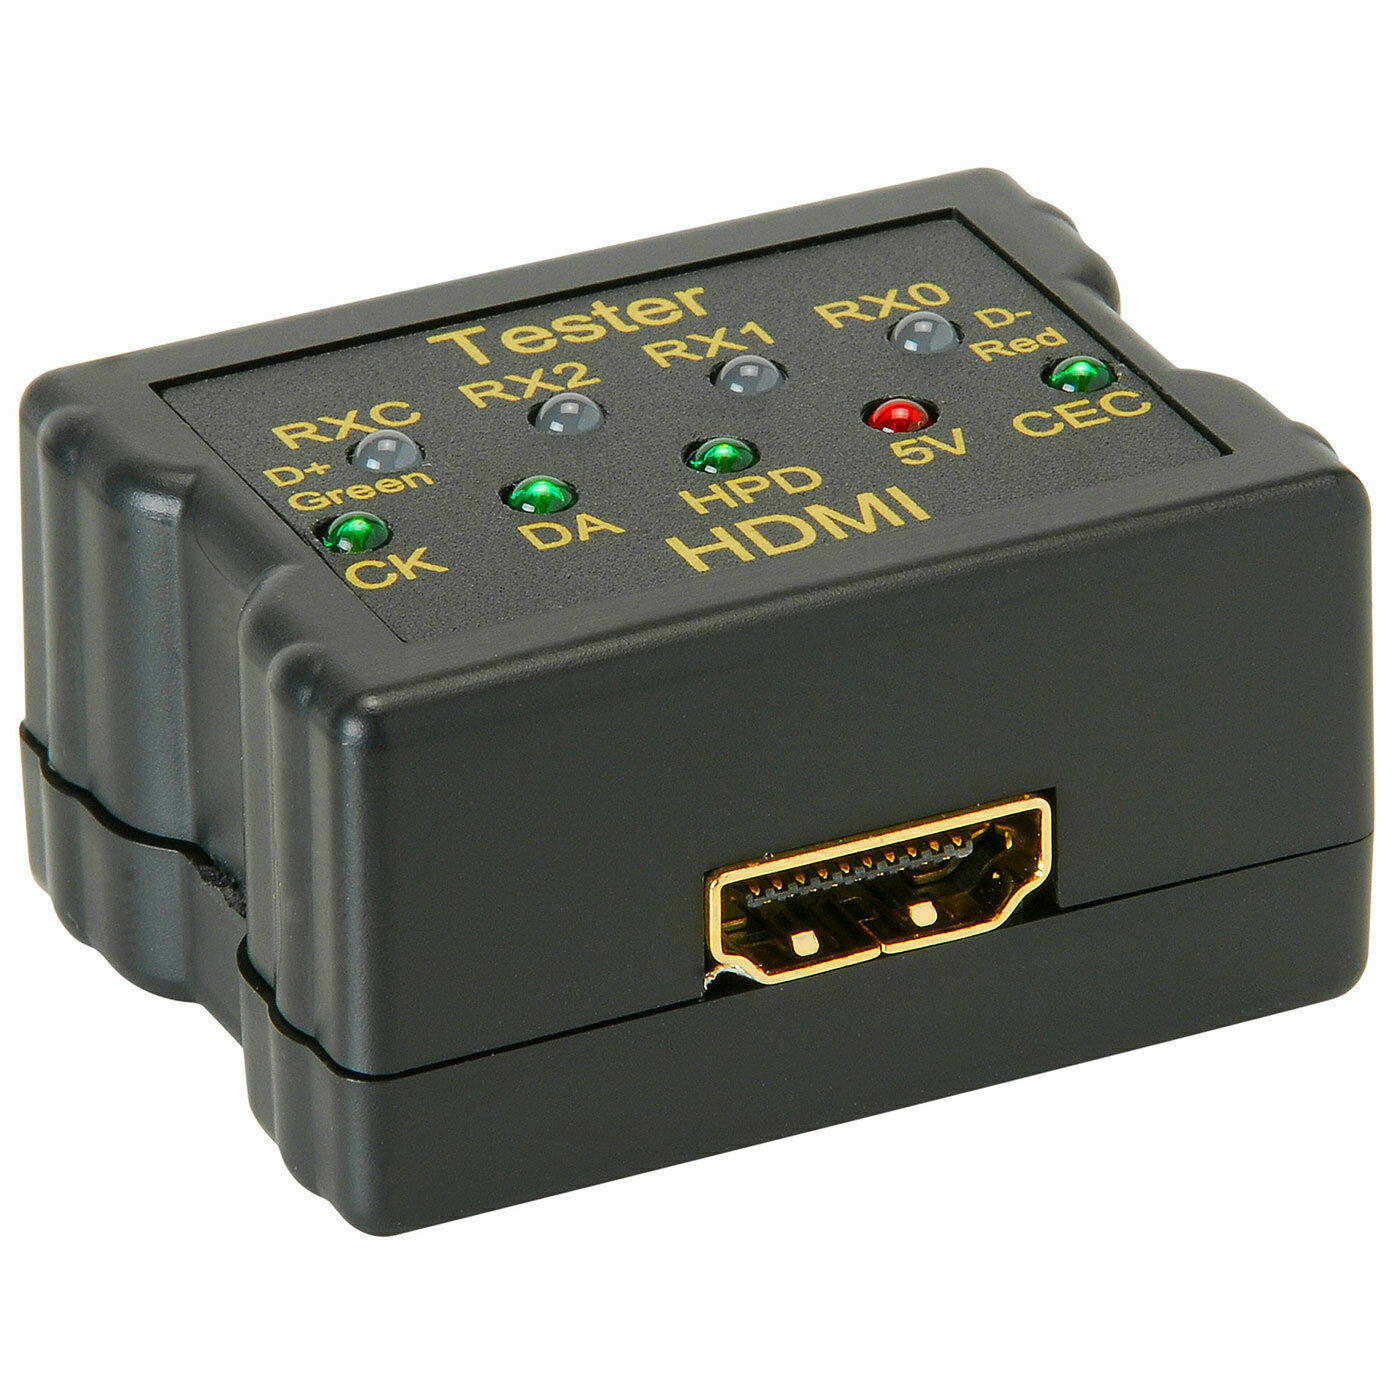 HDMI Cable Signal Tester - $39.95